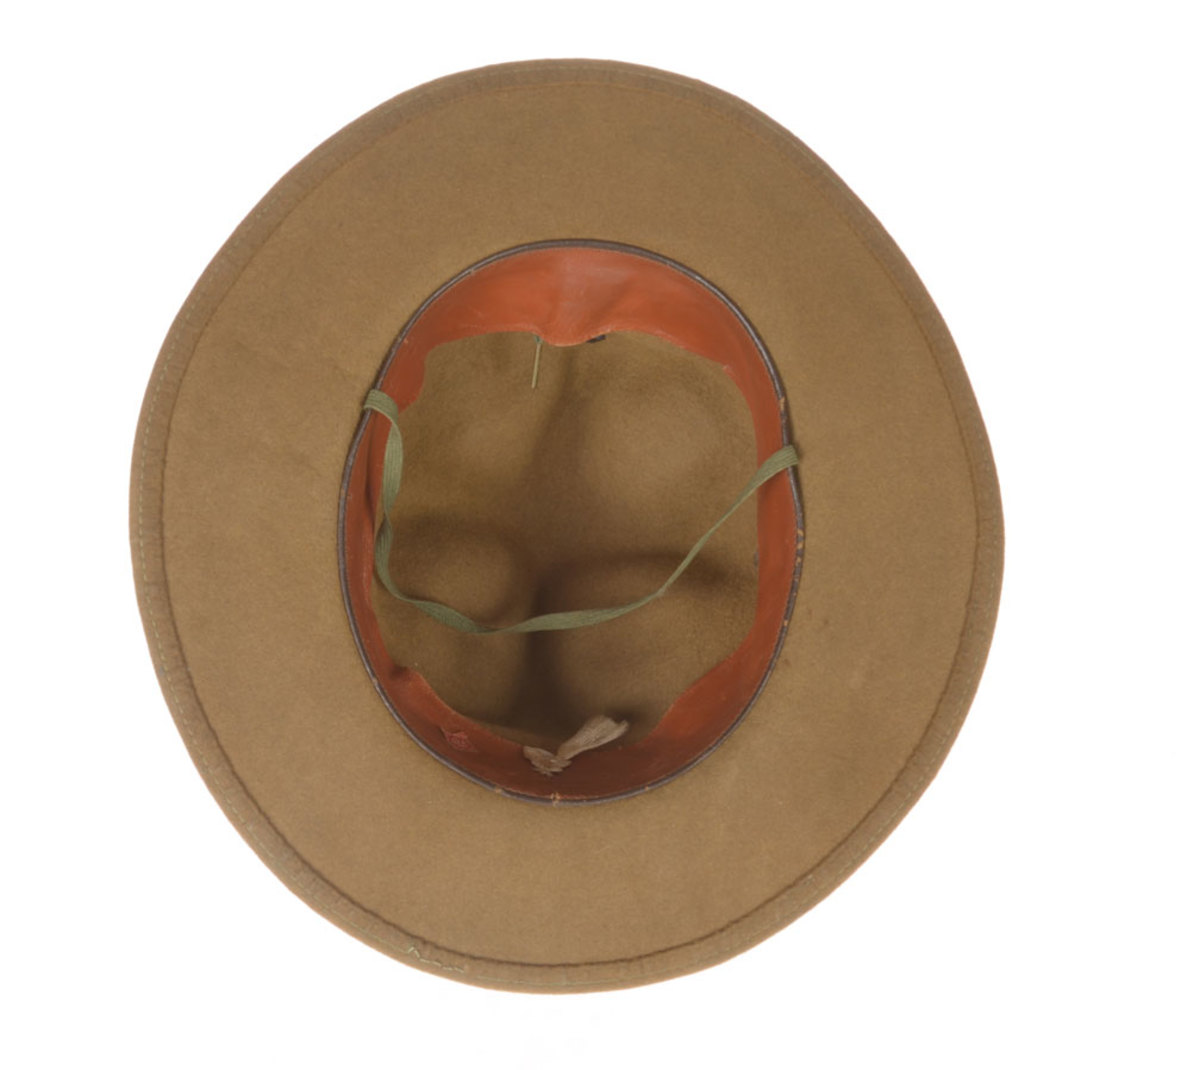 The turned over and stitched brim is the most obvious characteristic of the P1912 hat.